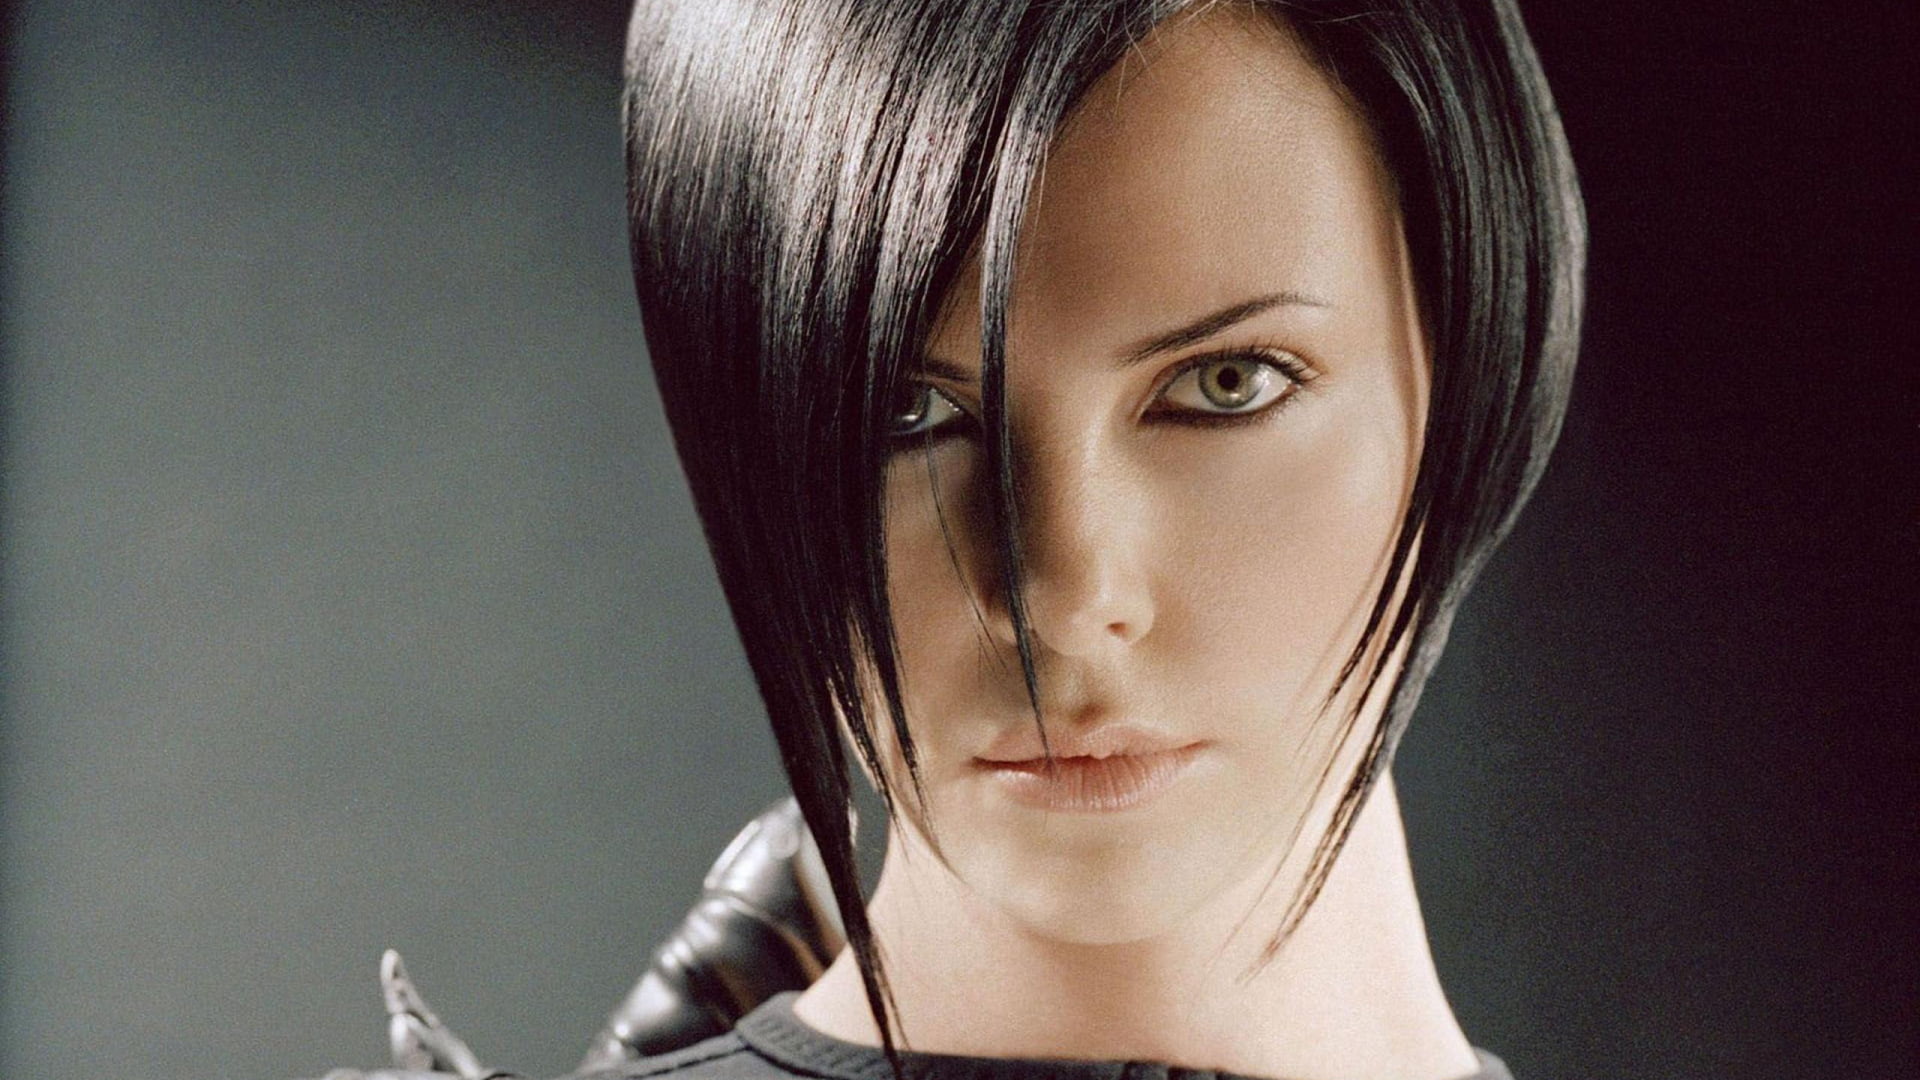 Charlize Theron, Aeon Flux, portrait, looking at camera, one person